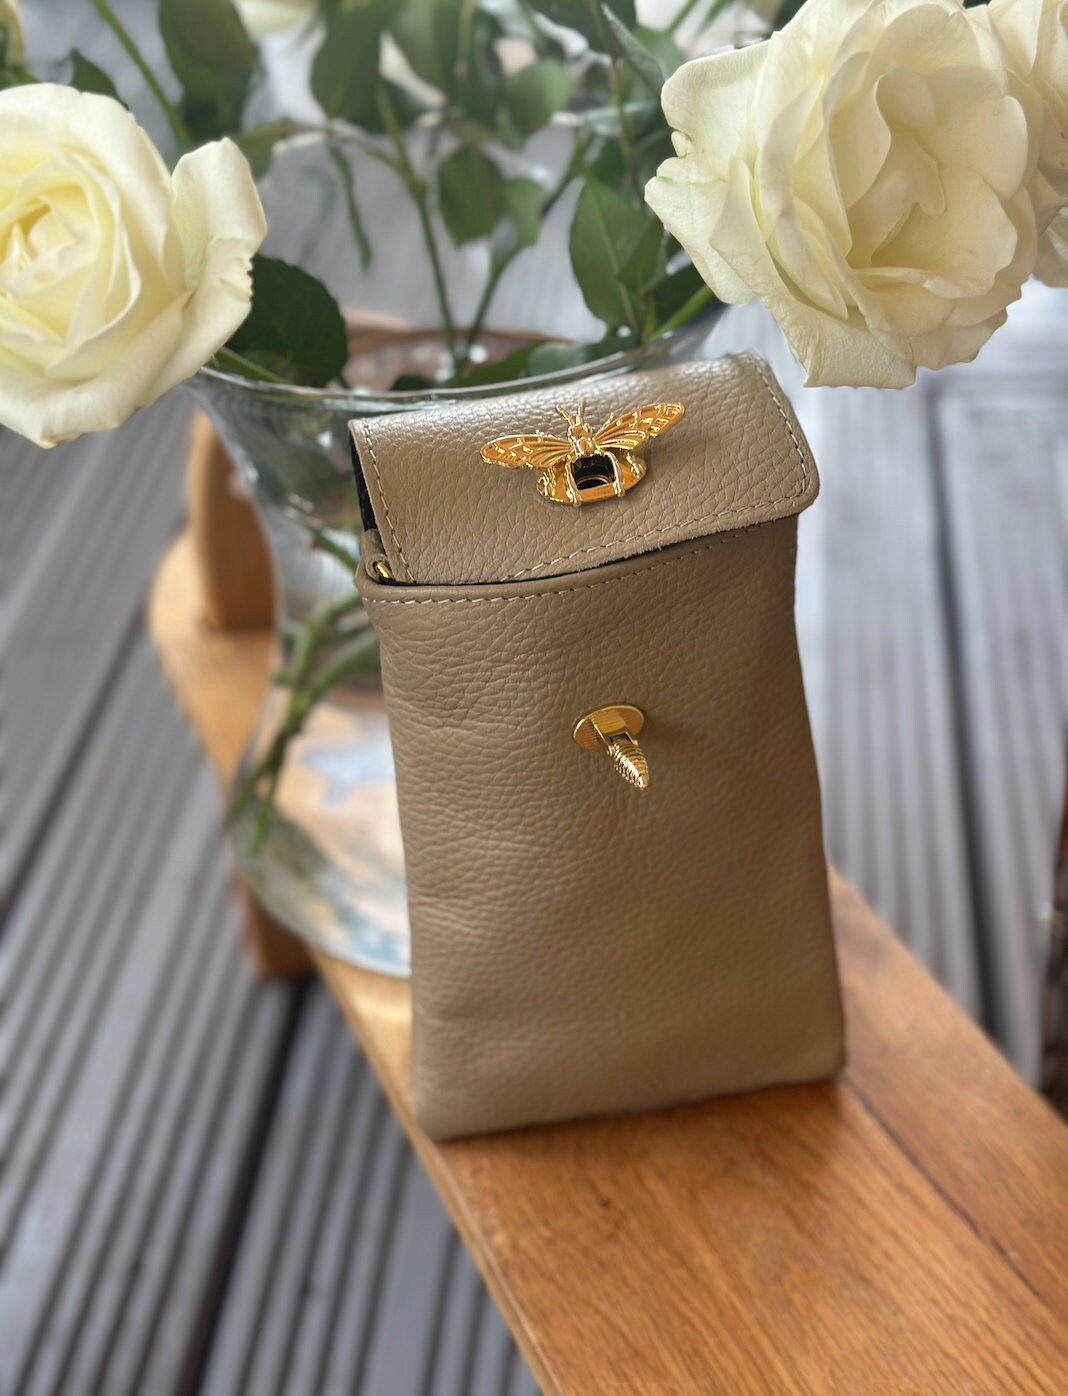 Made in Italy Dark Beige Leather Phone Bag, Phone Crossbody, Phone Pouch, Bee Phone Bag,